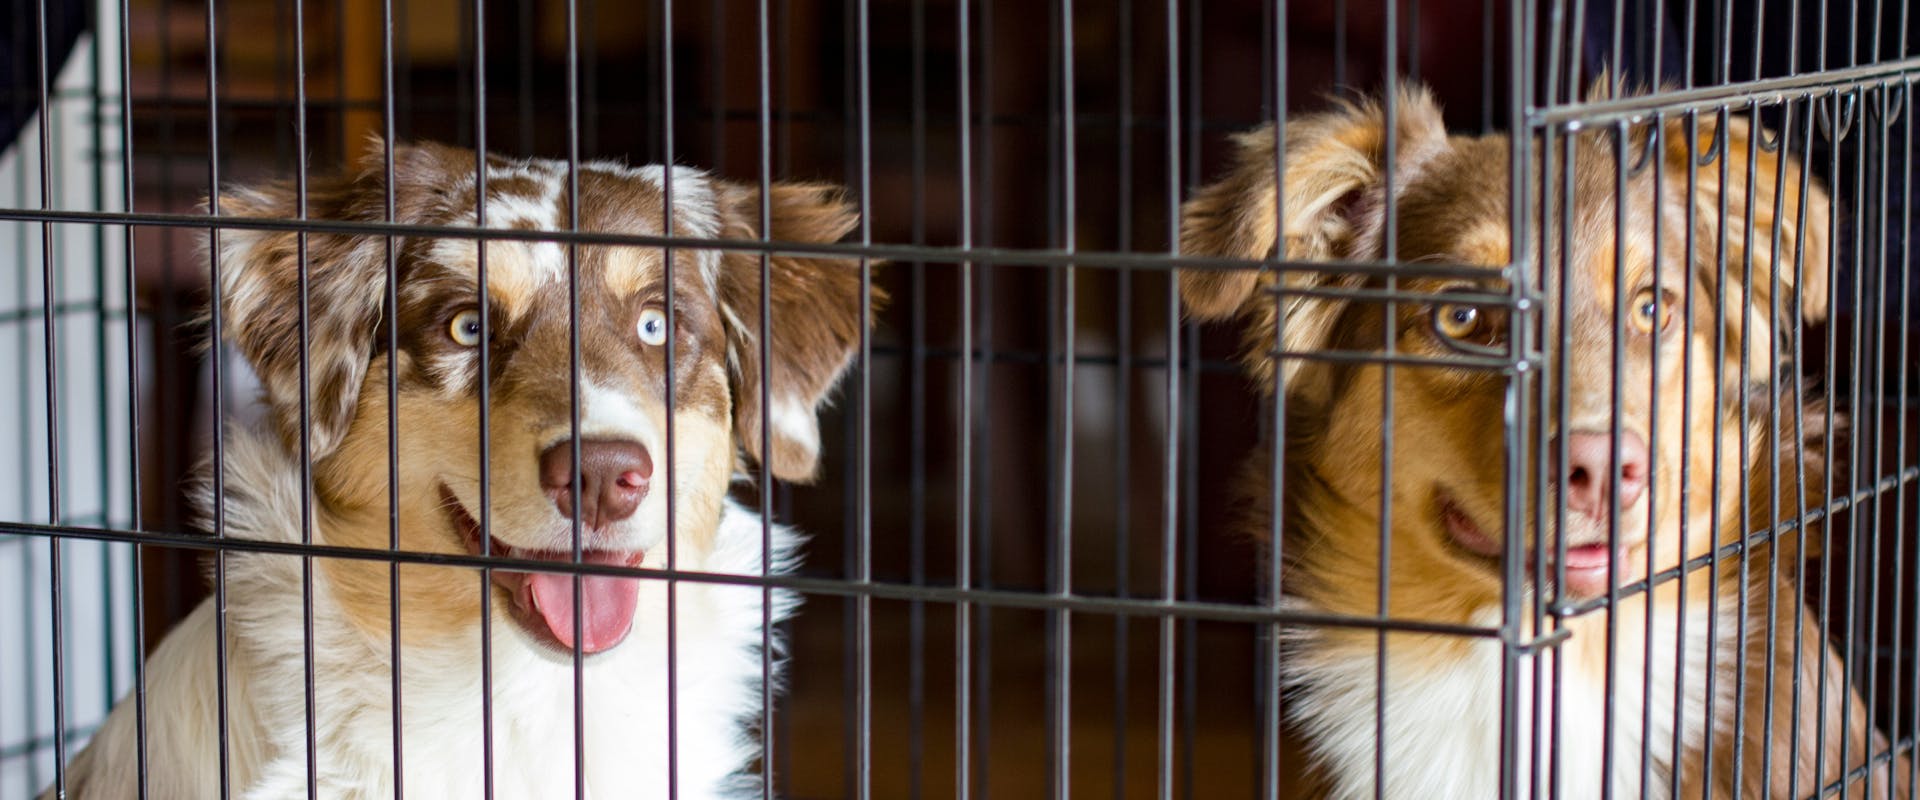 two austalian shepherds inside a dog crate for extra large dogs